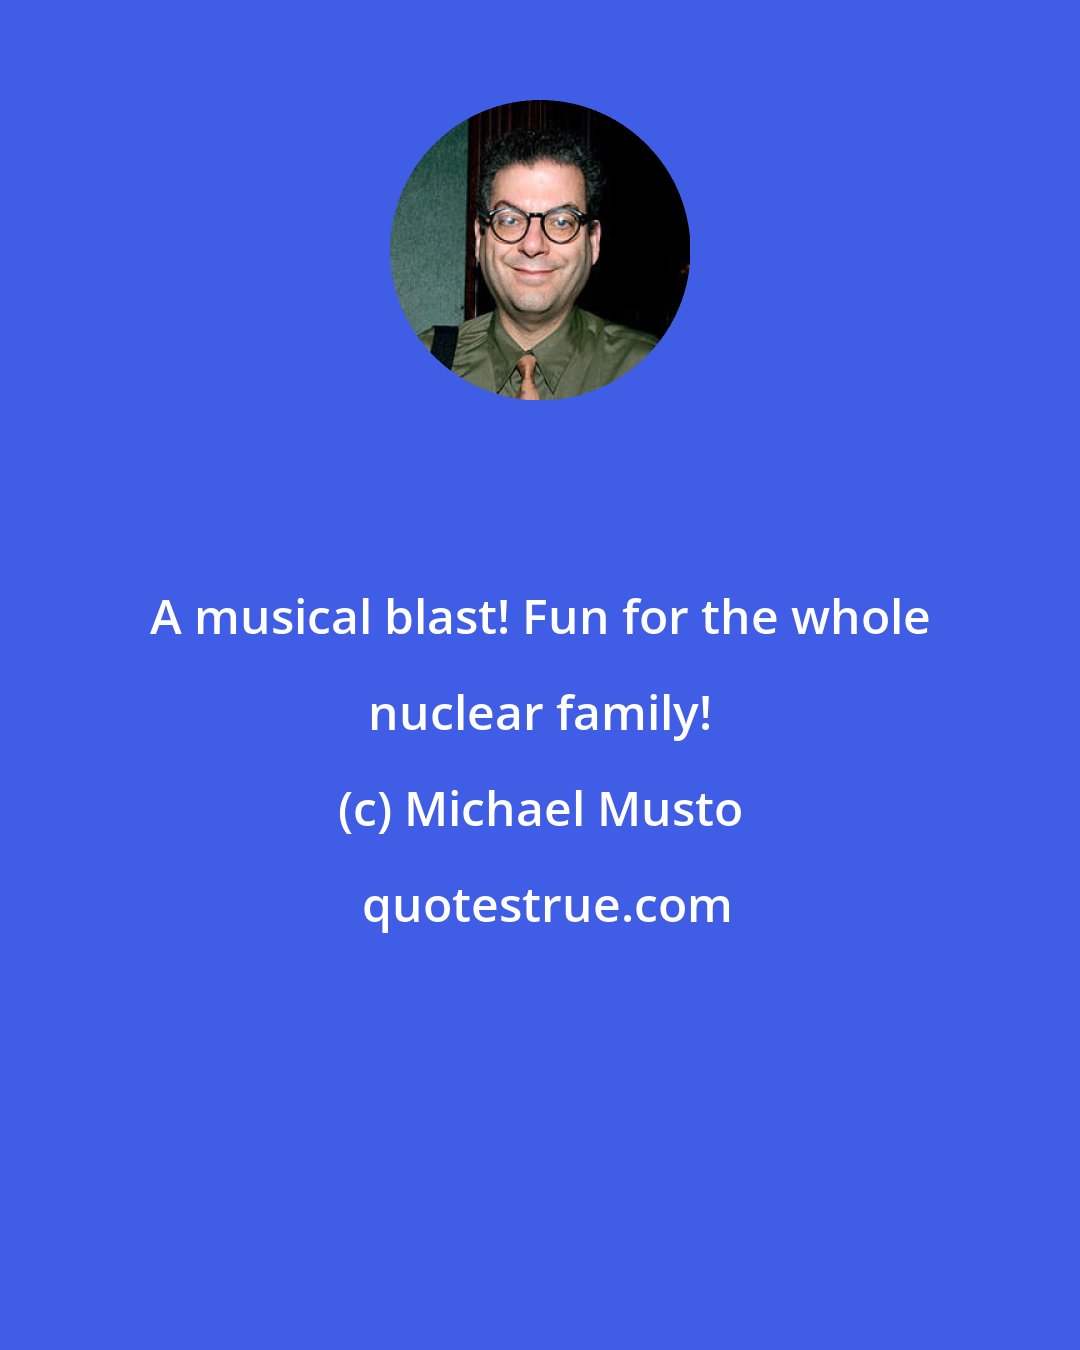 Michael Musto: A musical blast! Fun for the whole nuclear family!